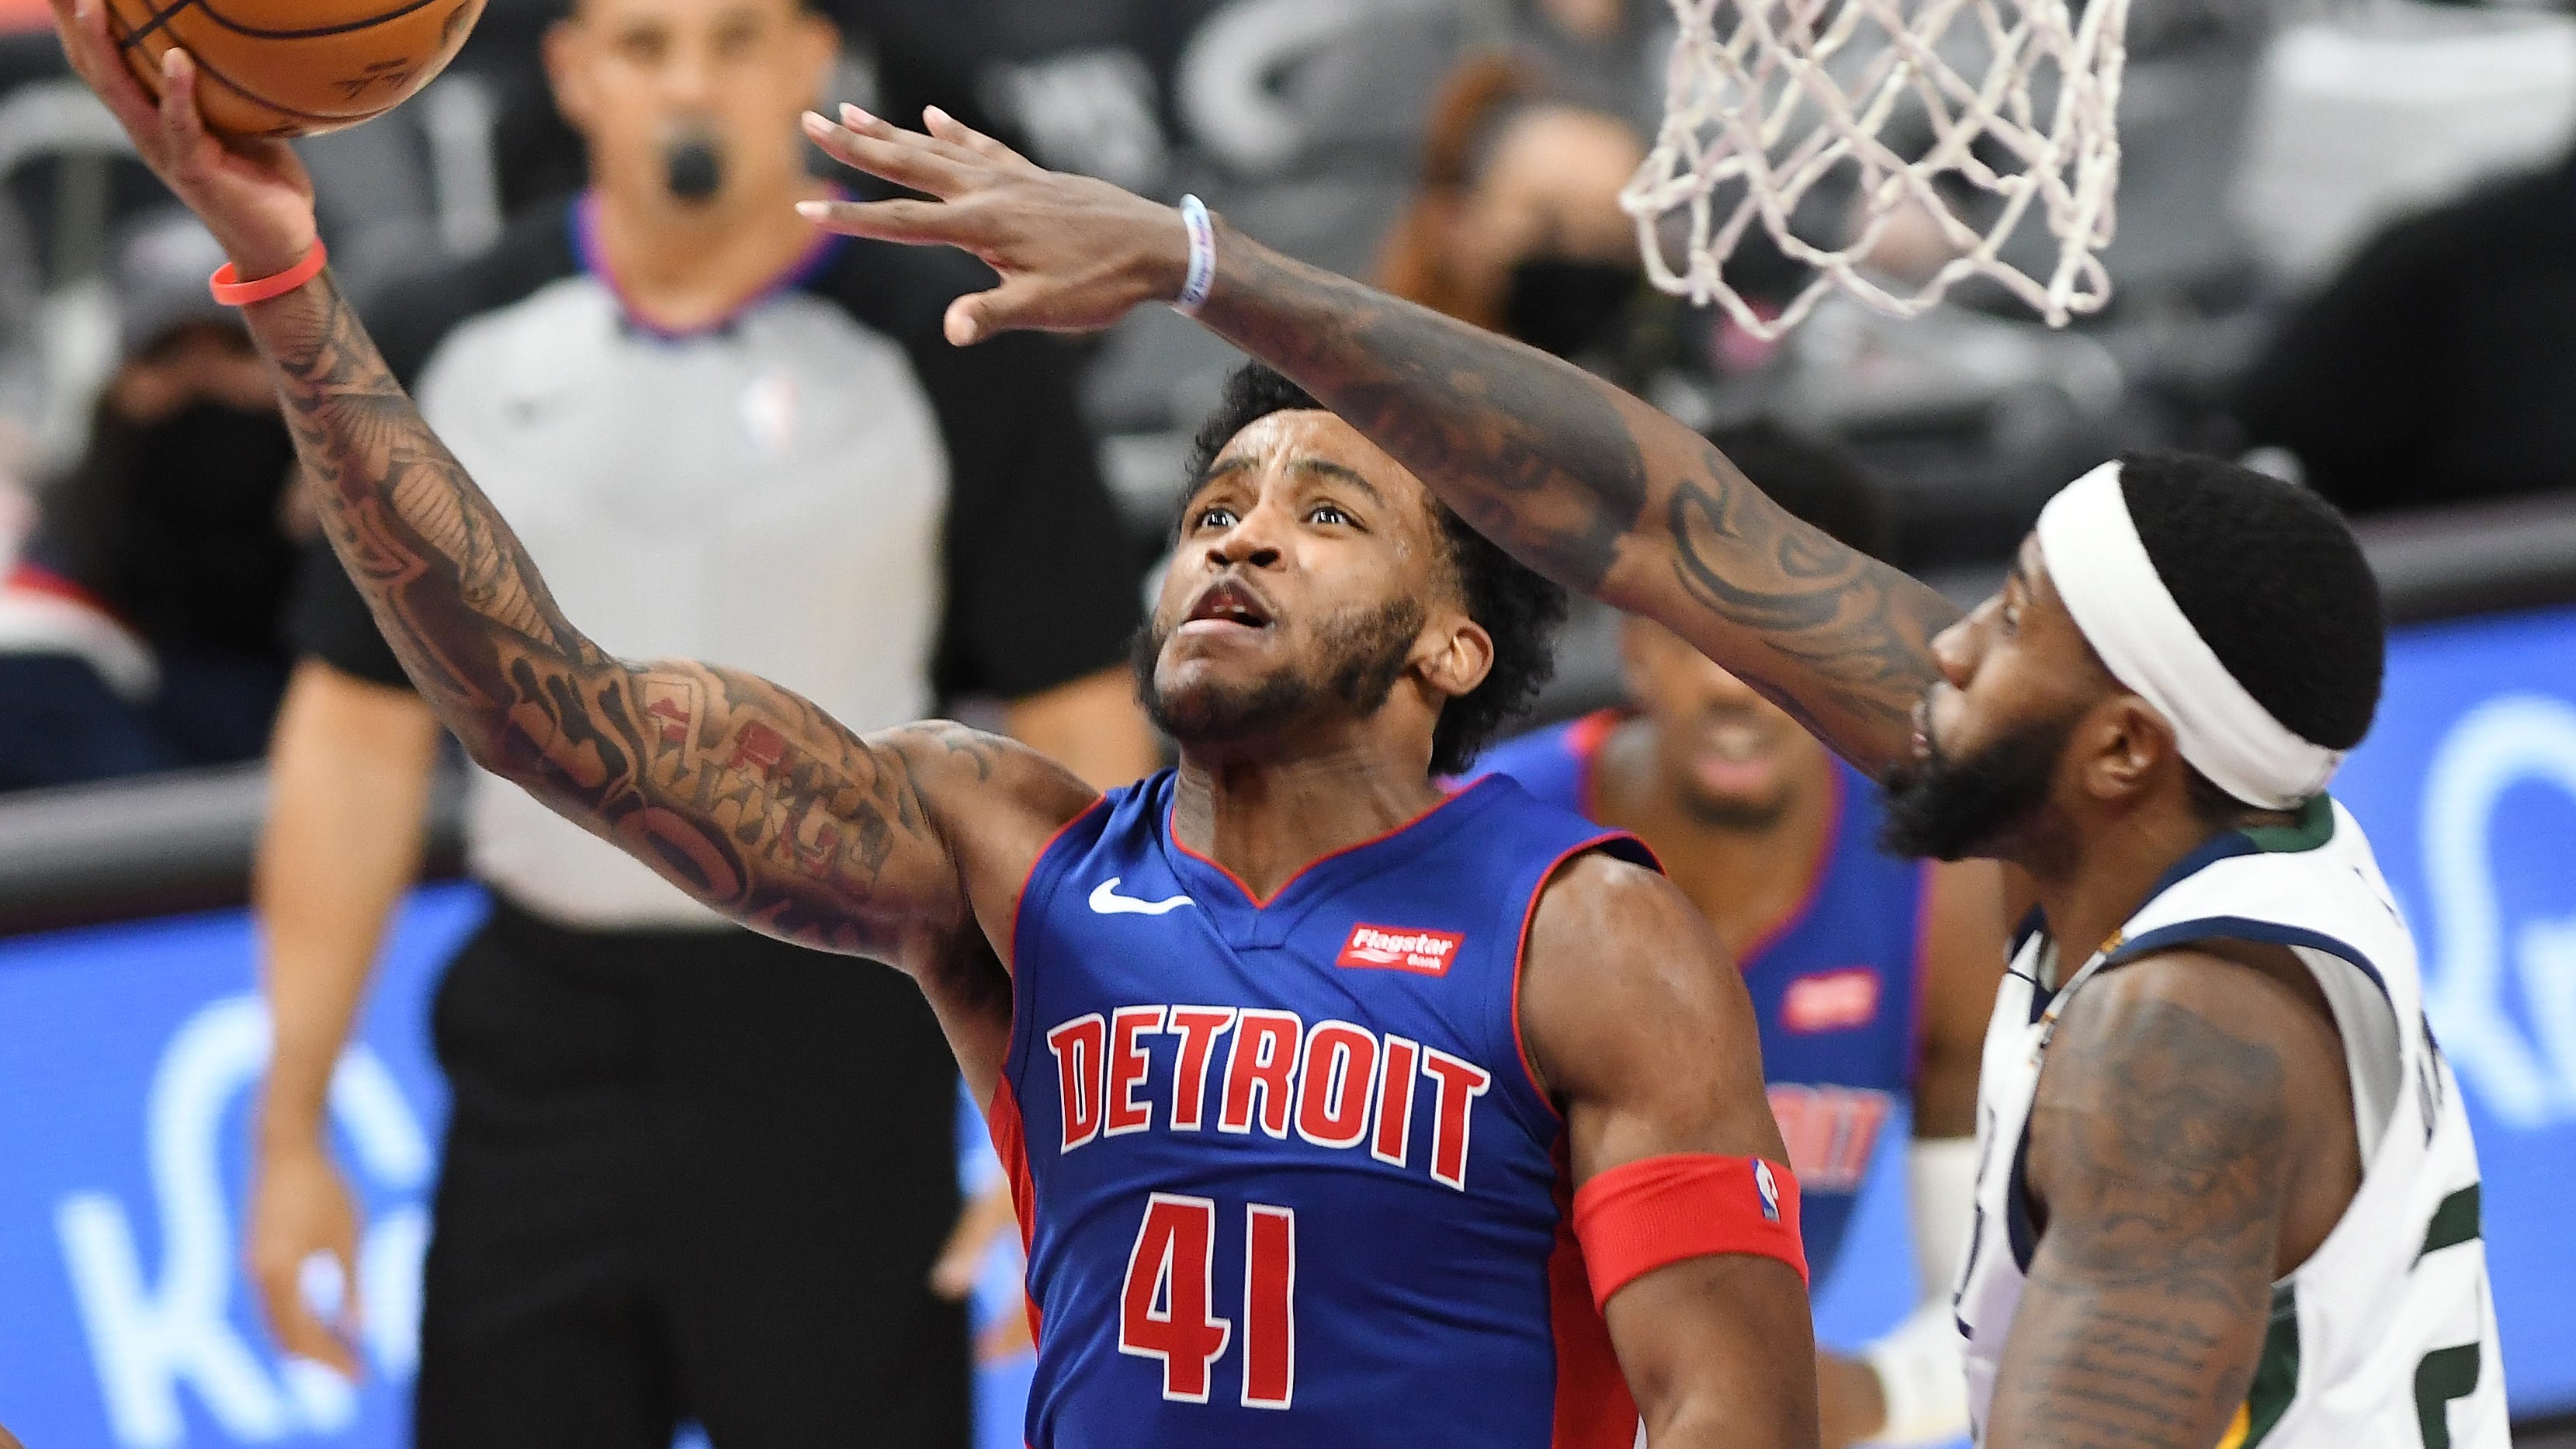 Pistons rookie Saddiq Bey is averaging 9.6 points and is shooting 40.5% from 3-point range.